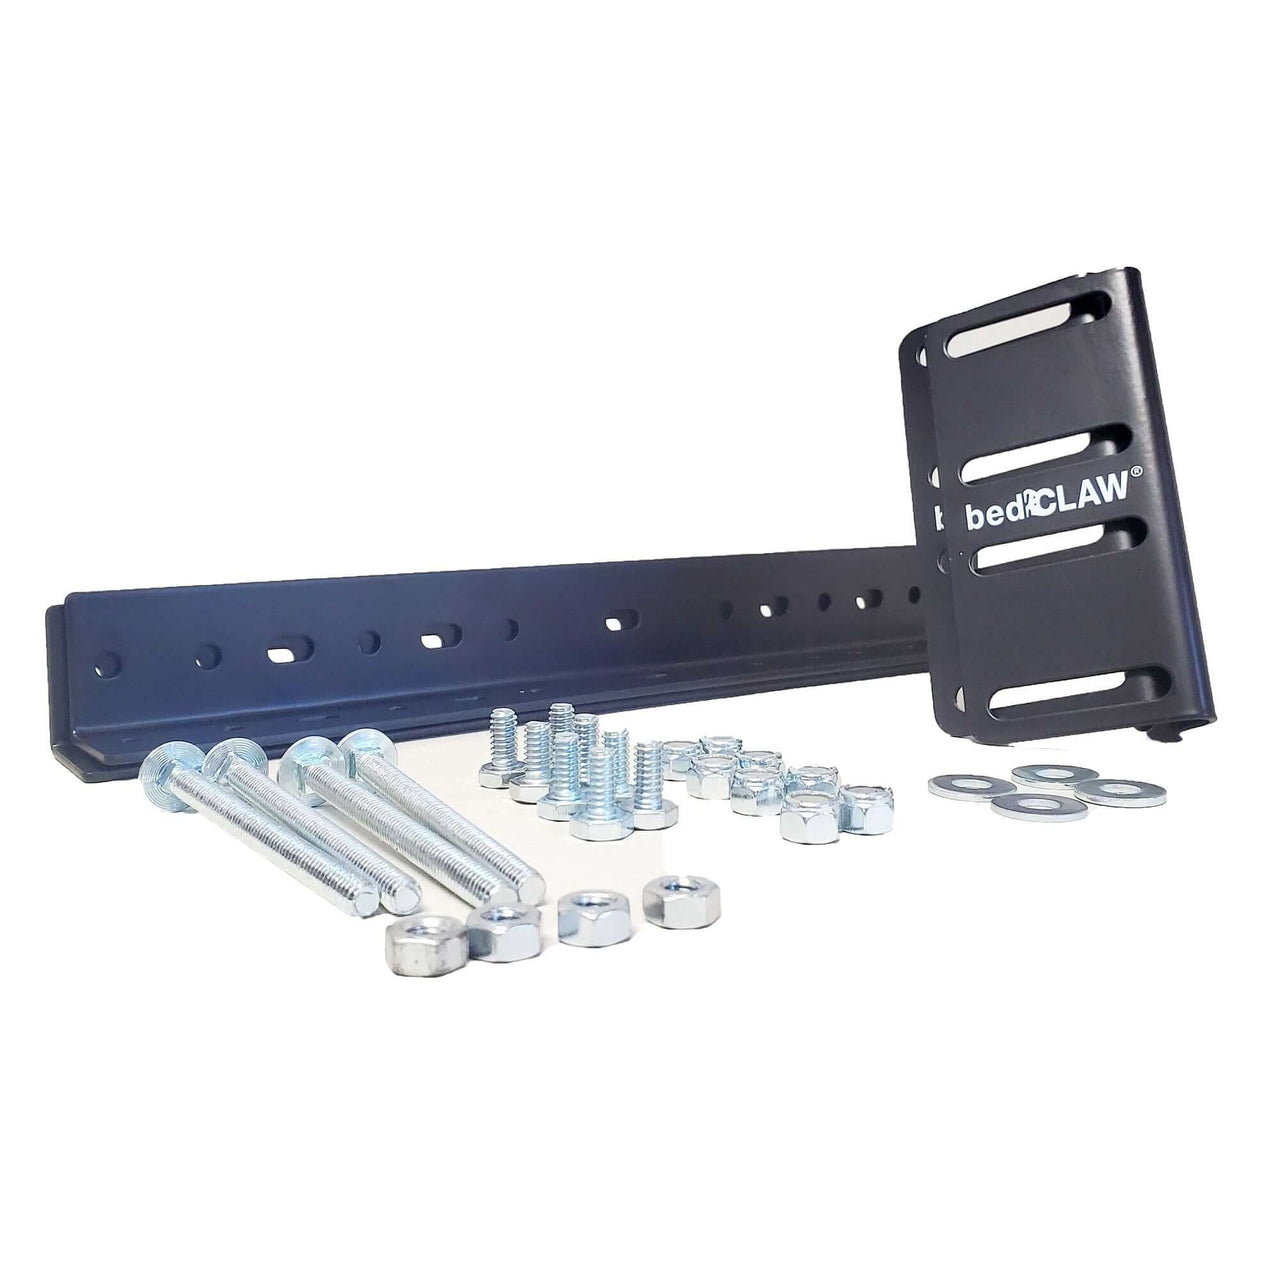 bedCLAW Universal Bed Frame Footboard Attachment Kit with Combo Bag Hardware